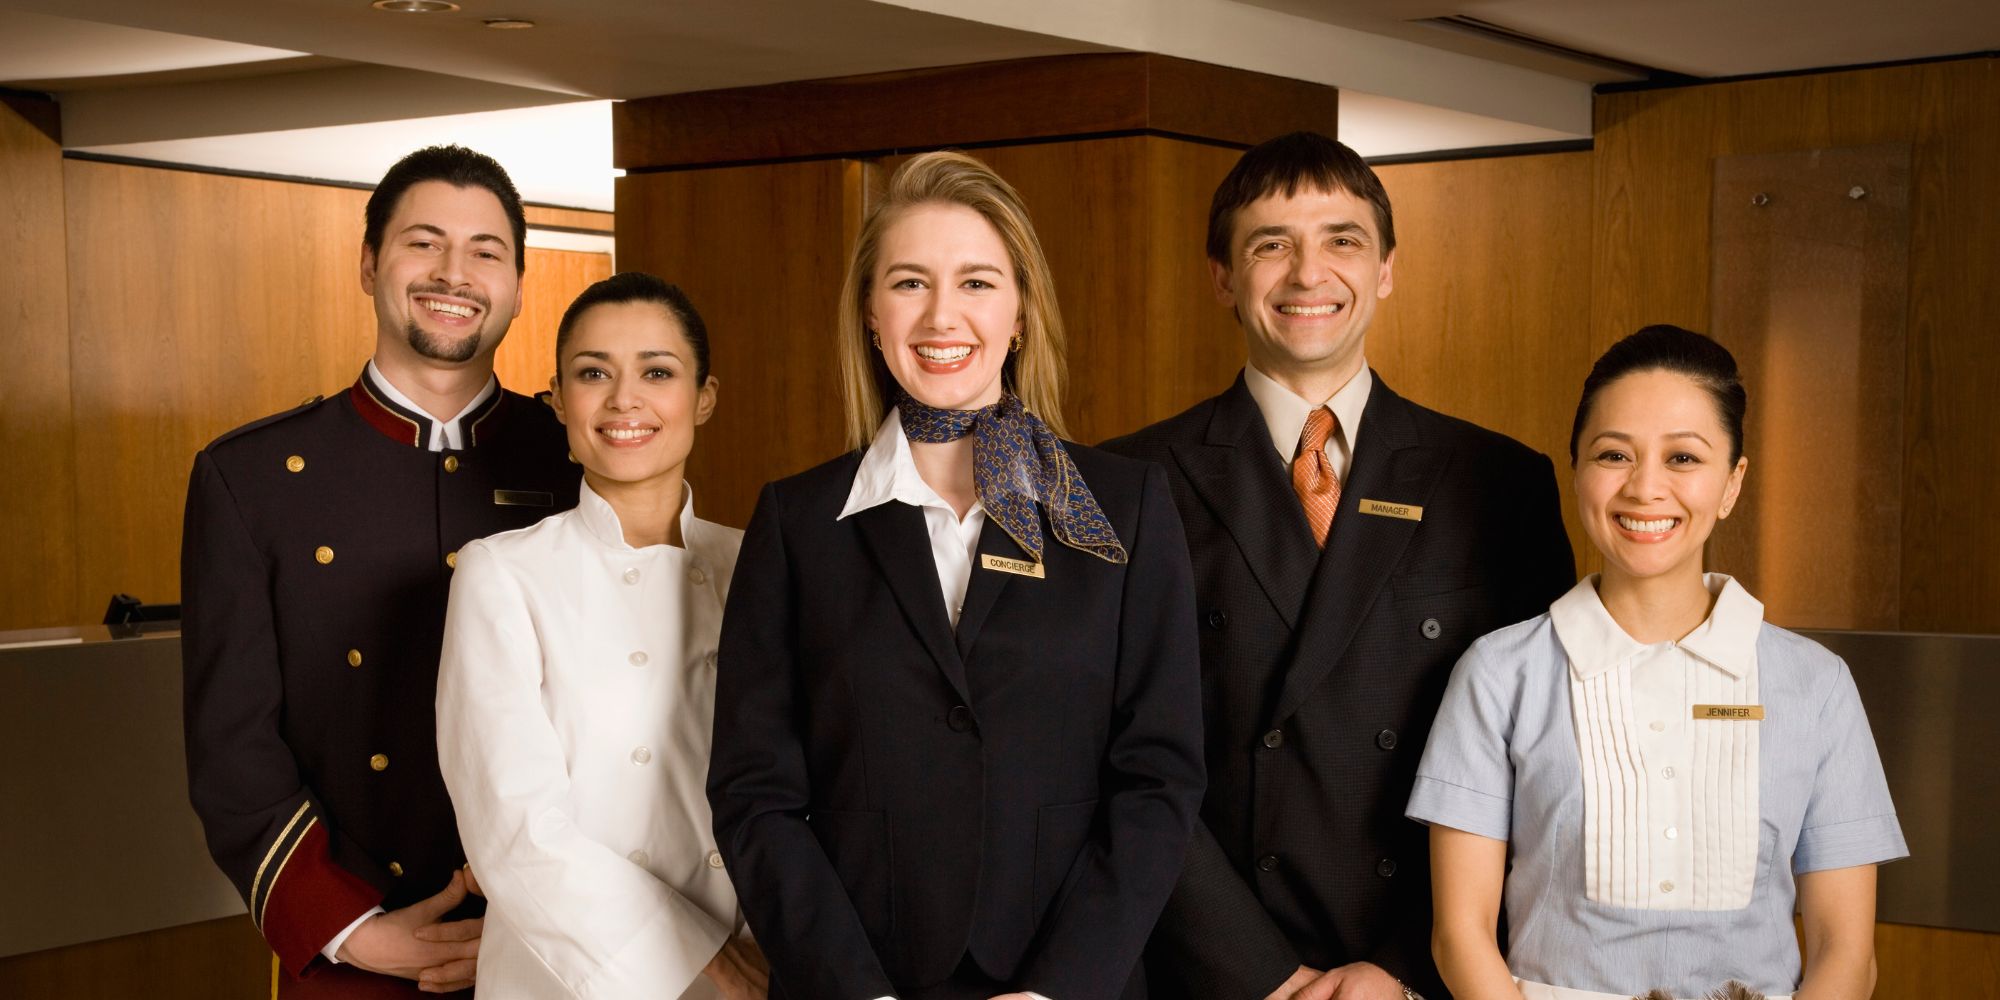 Solving the staffing crisis within the hospitality industry